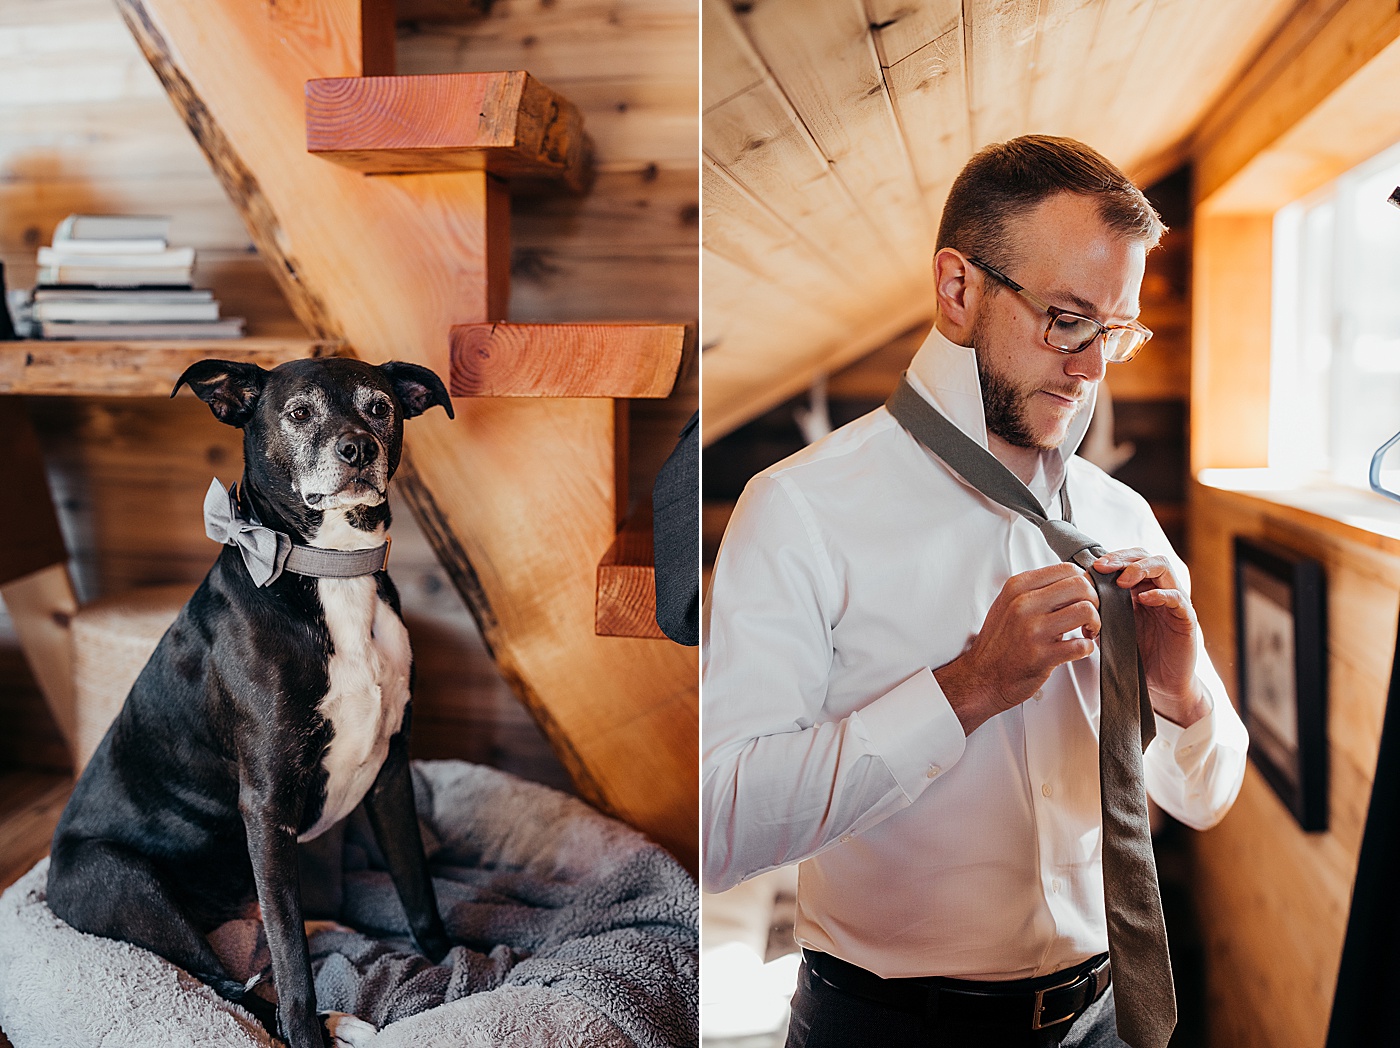 Dog on the left and groom on the right getting ready for elopement | Megan Montalvo Photography